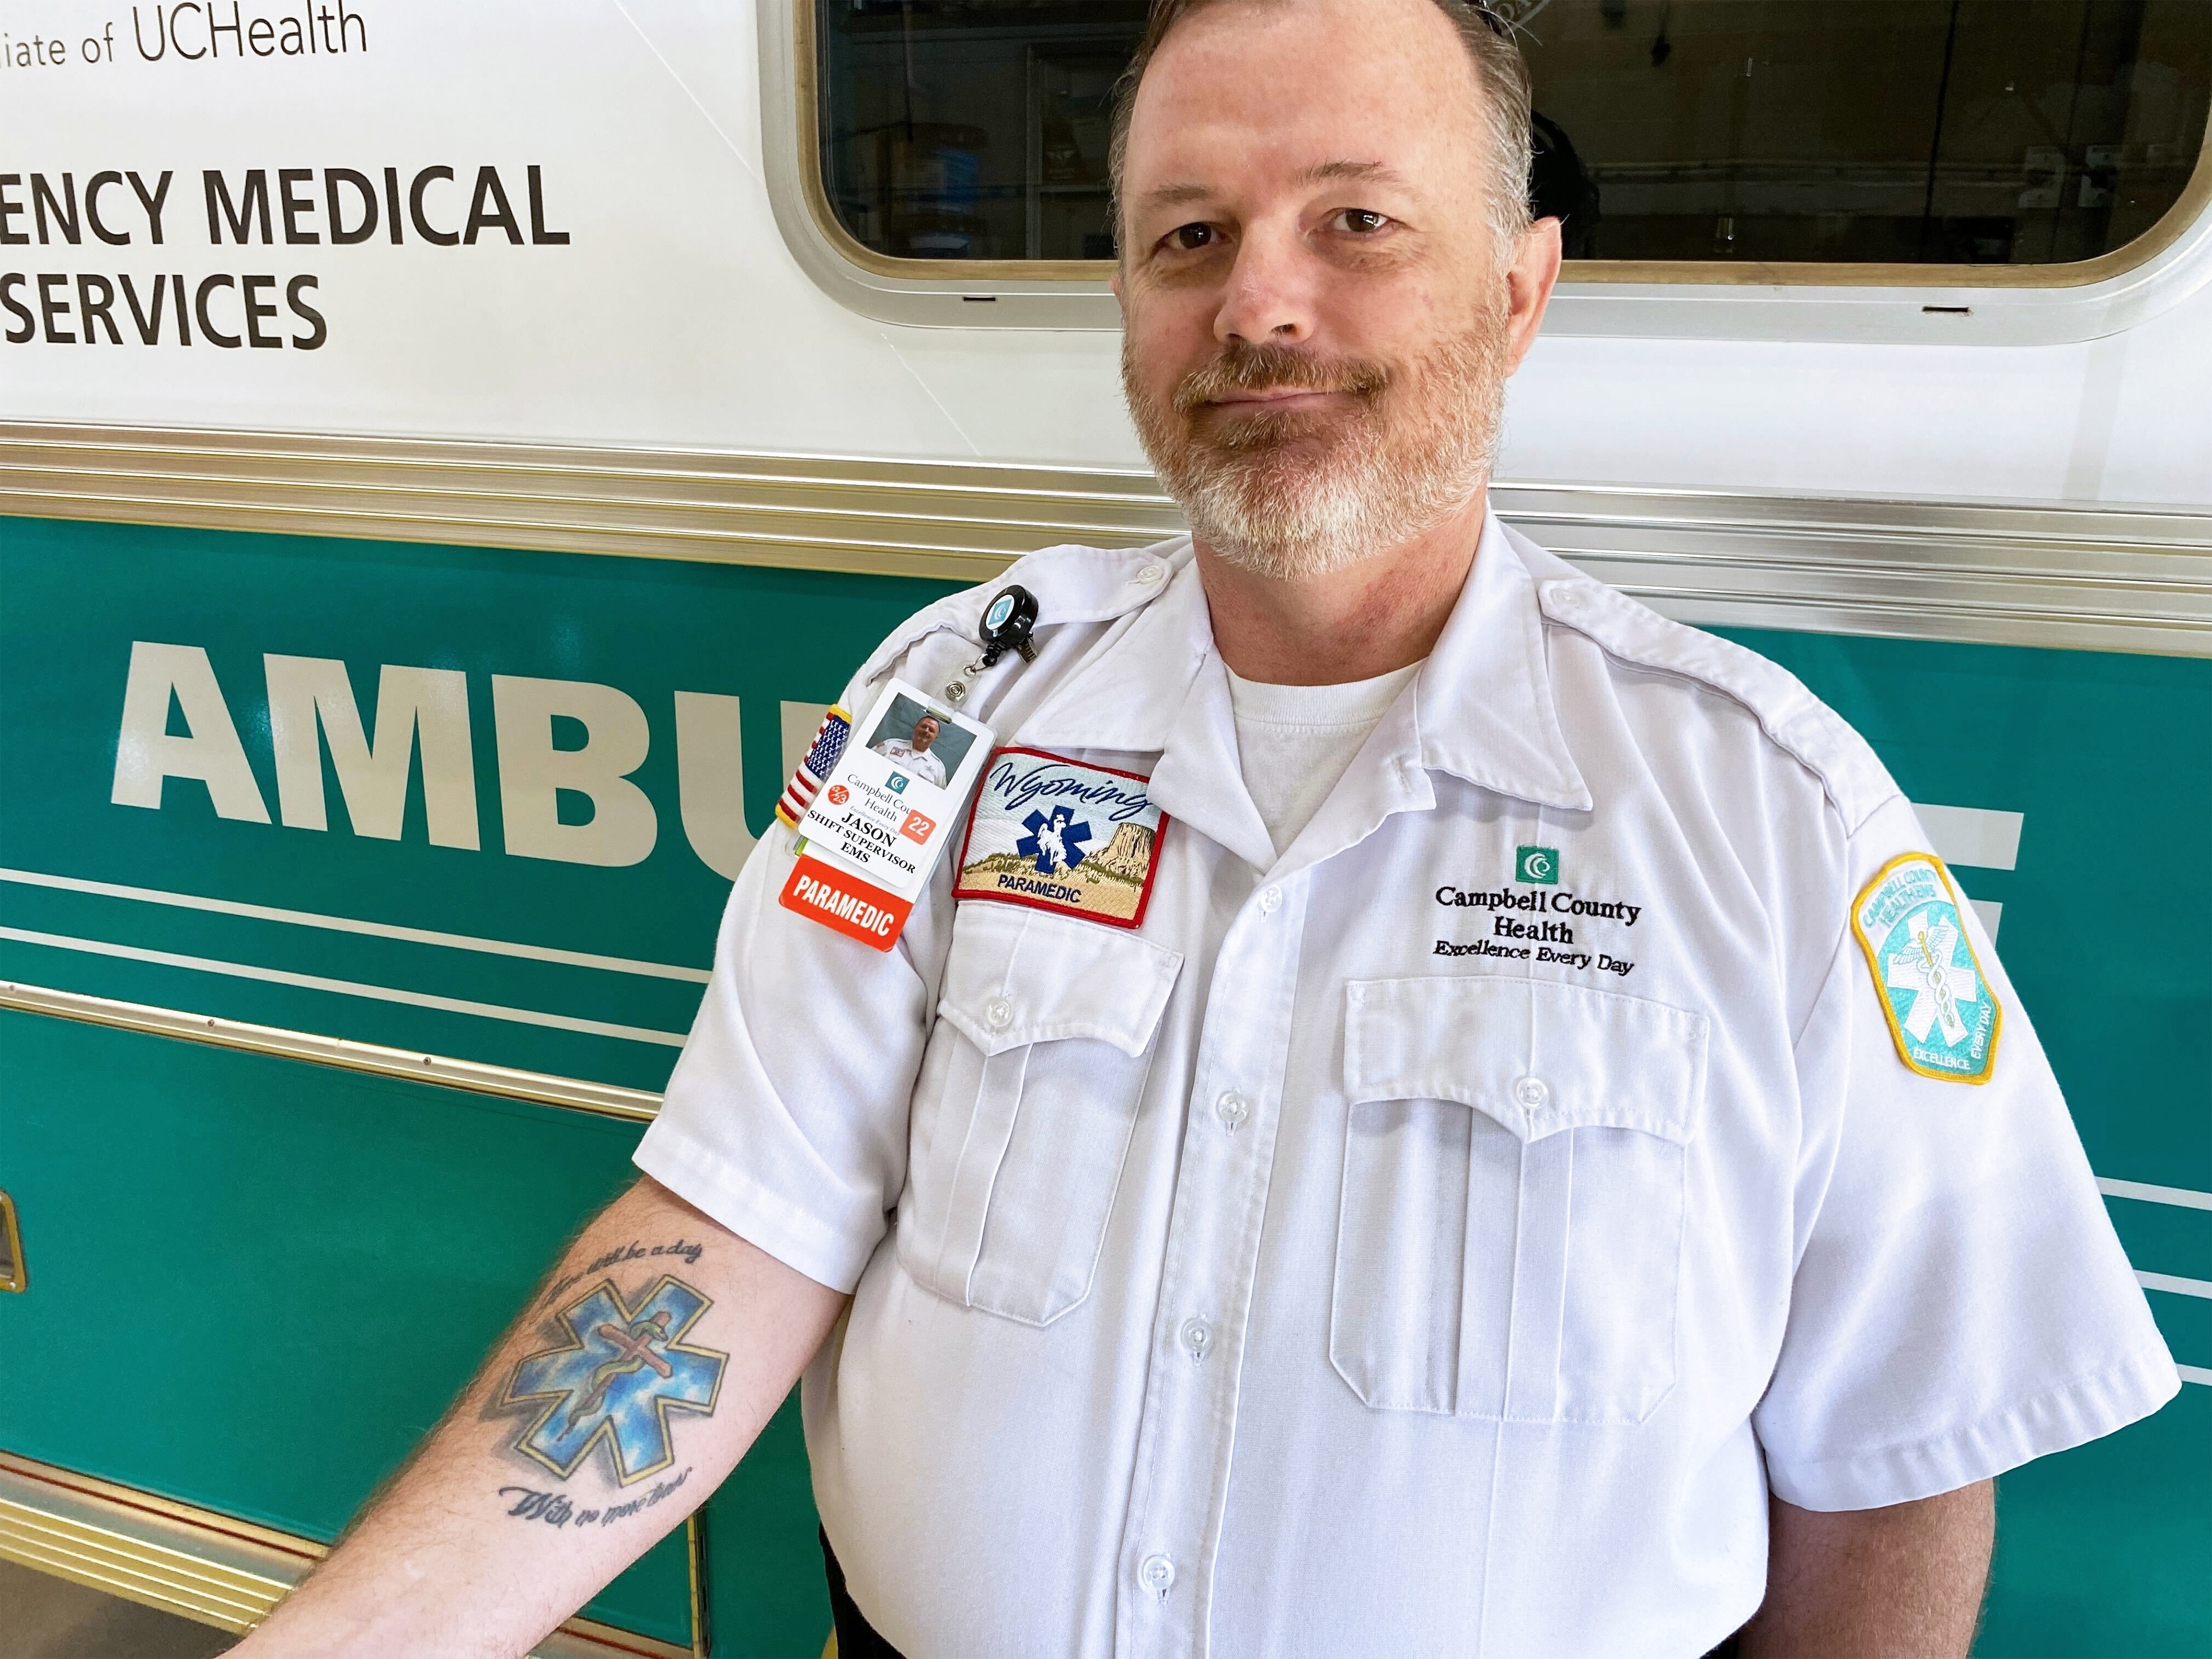 A photo of a male paramedic showing a tattoo on his forearm of the emergency medicine symbol while he poses in front of an ambulance.